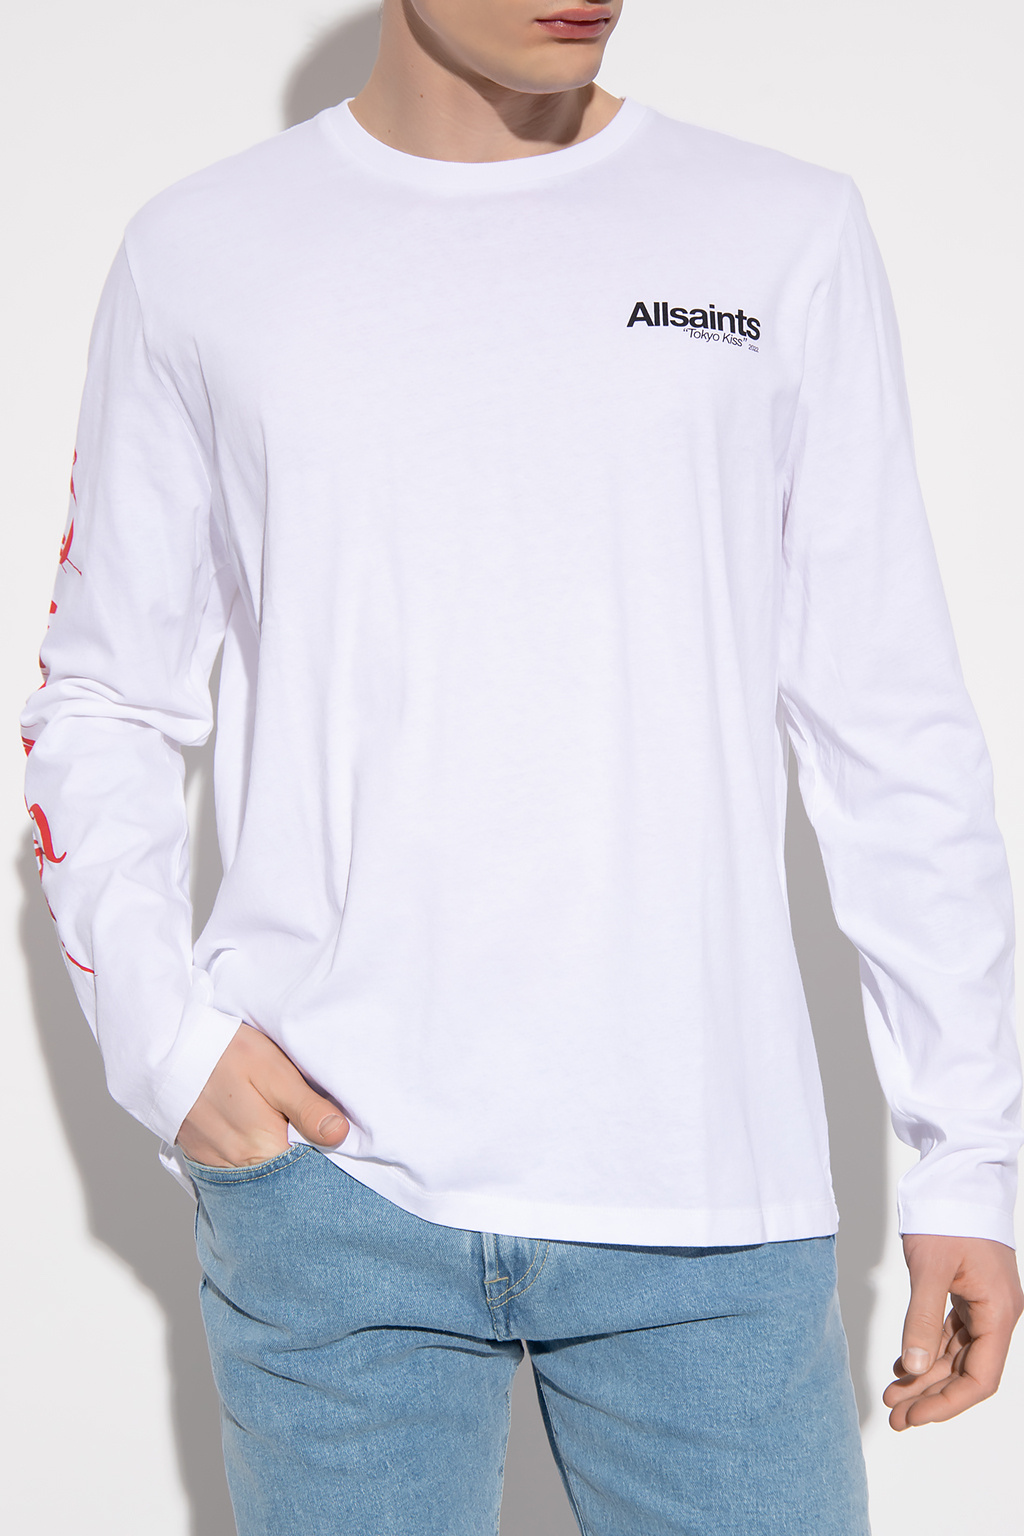 AllSaints ‘Silver’ T-shirt Sweatshirts with long sleeves